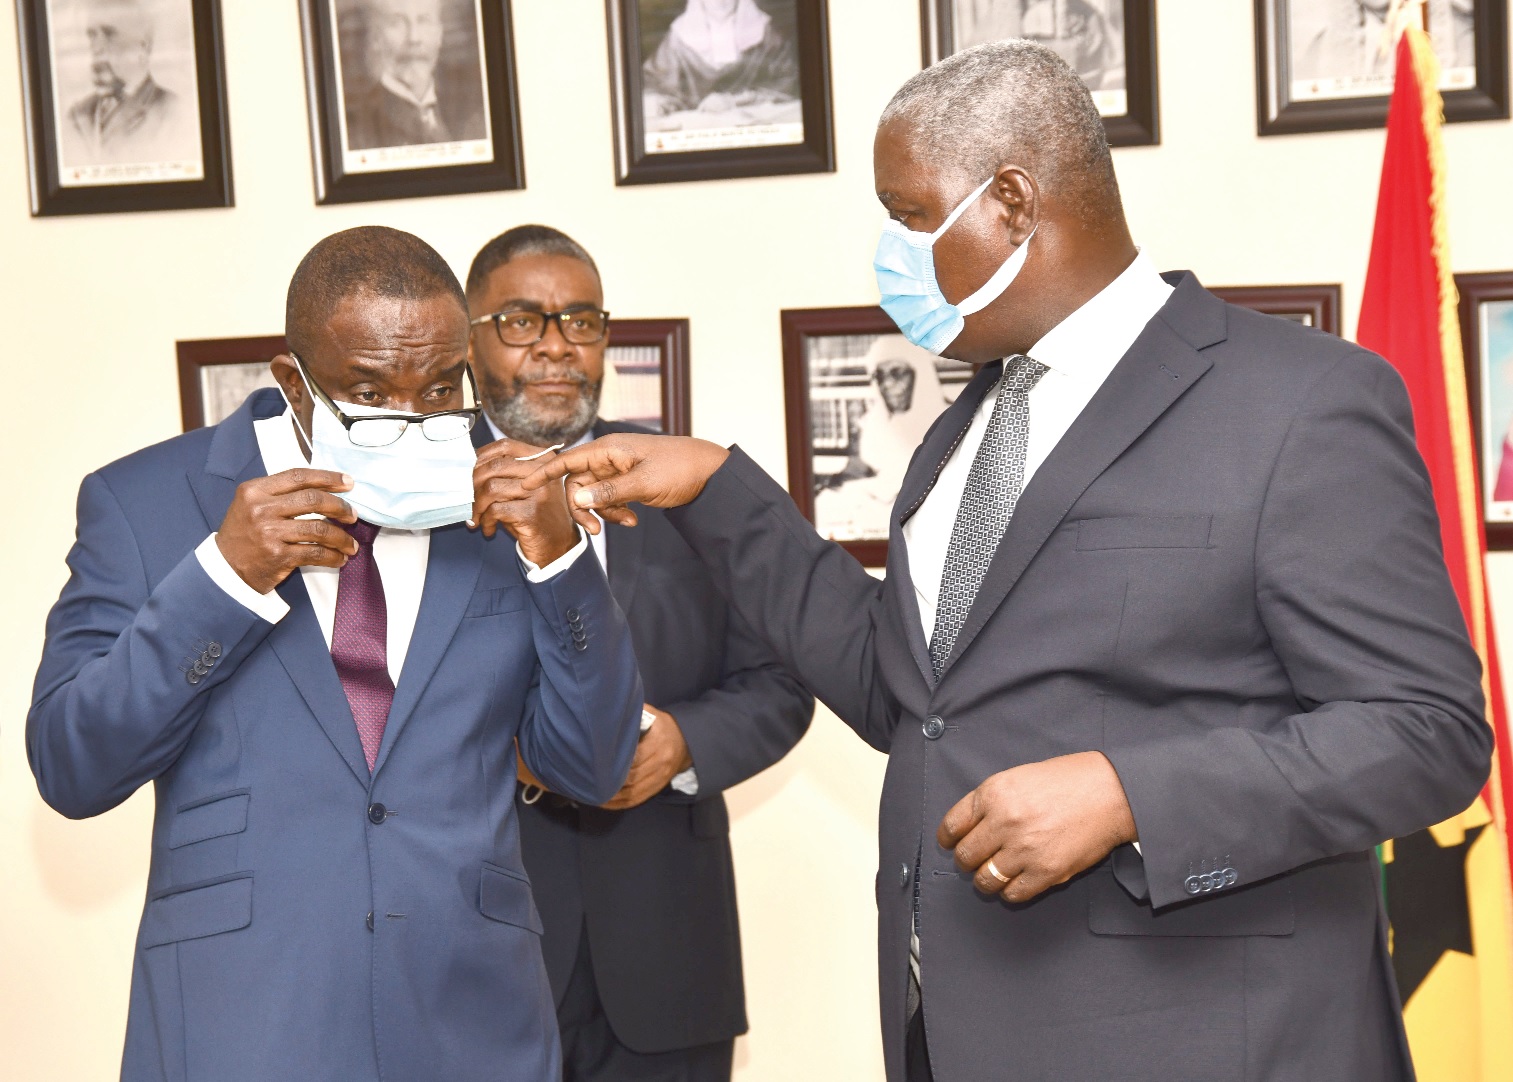 Justice Anin Yeboah (right) interacting with Dr George Agyekum Nana Donkor (2nd right), President, and Mr McDonald Saye Goanue, Vice-President, both of the ECOWAS Bank for Investment and Development, after their meeting. Picture: EBOW HANSON